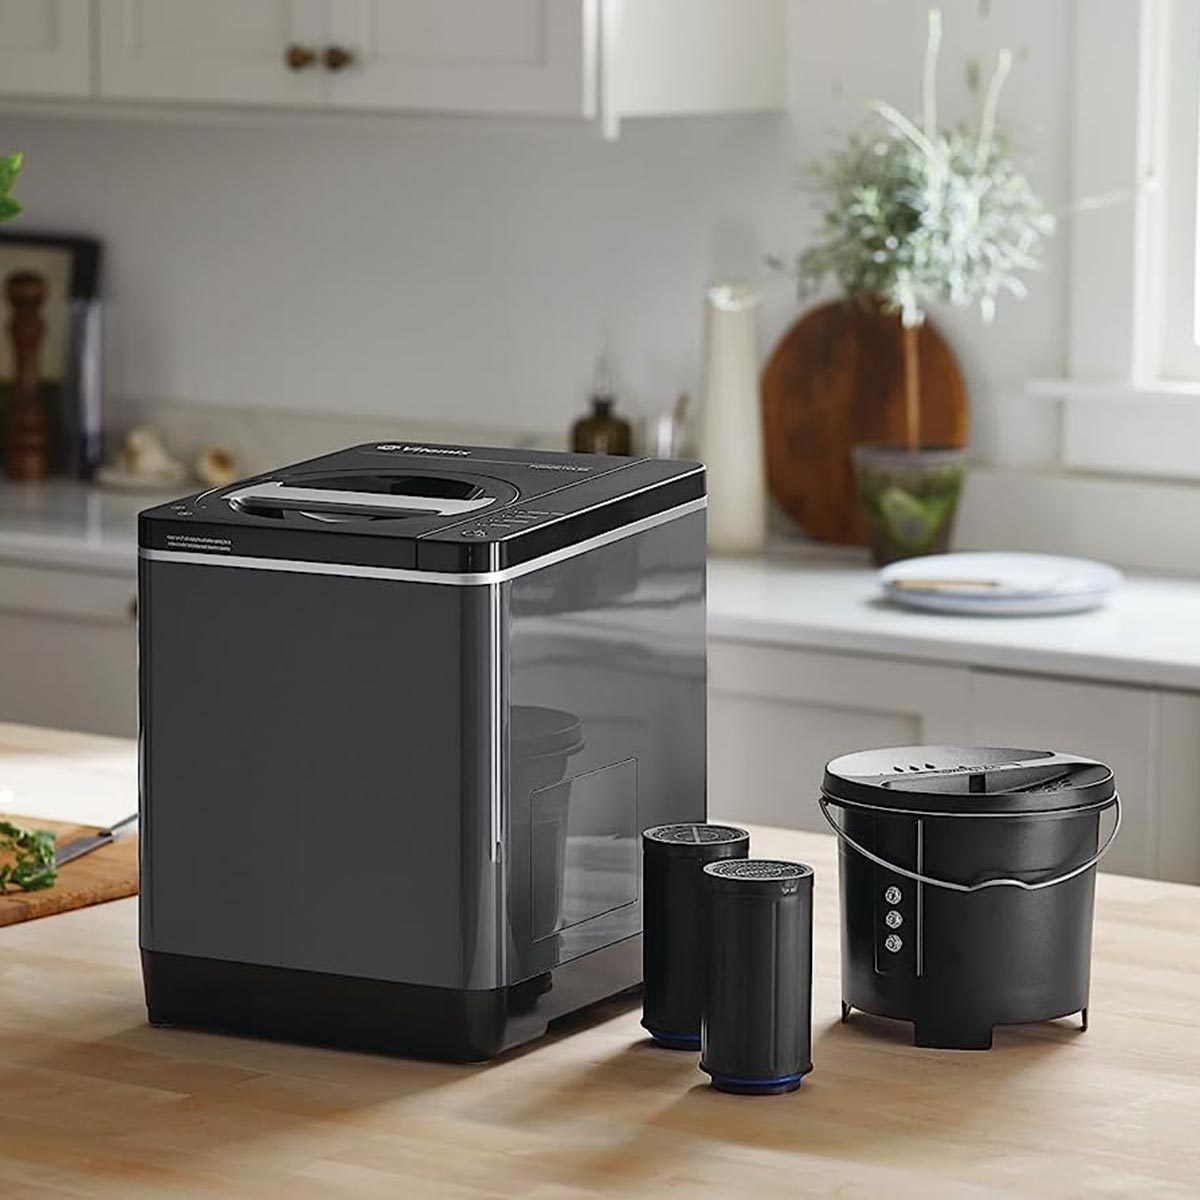 5 Best Electric Composters To Turn Food Into Fertilizer Ft Via Amazon.com